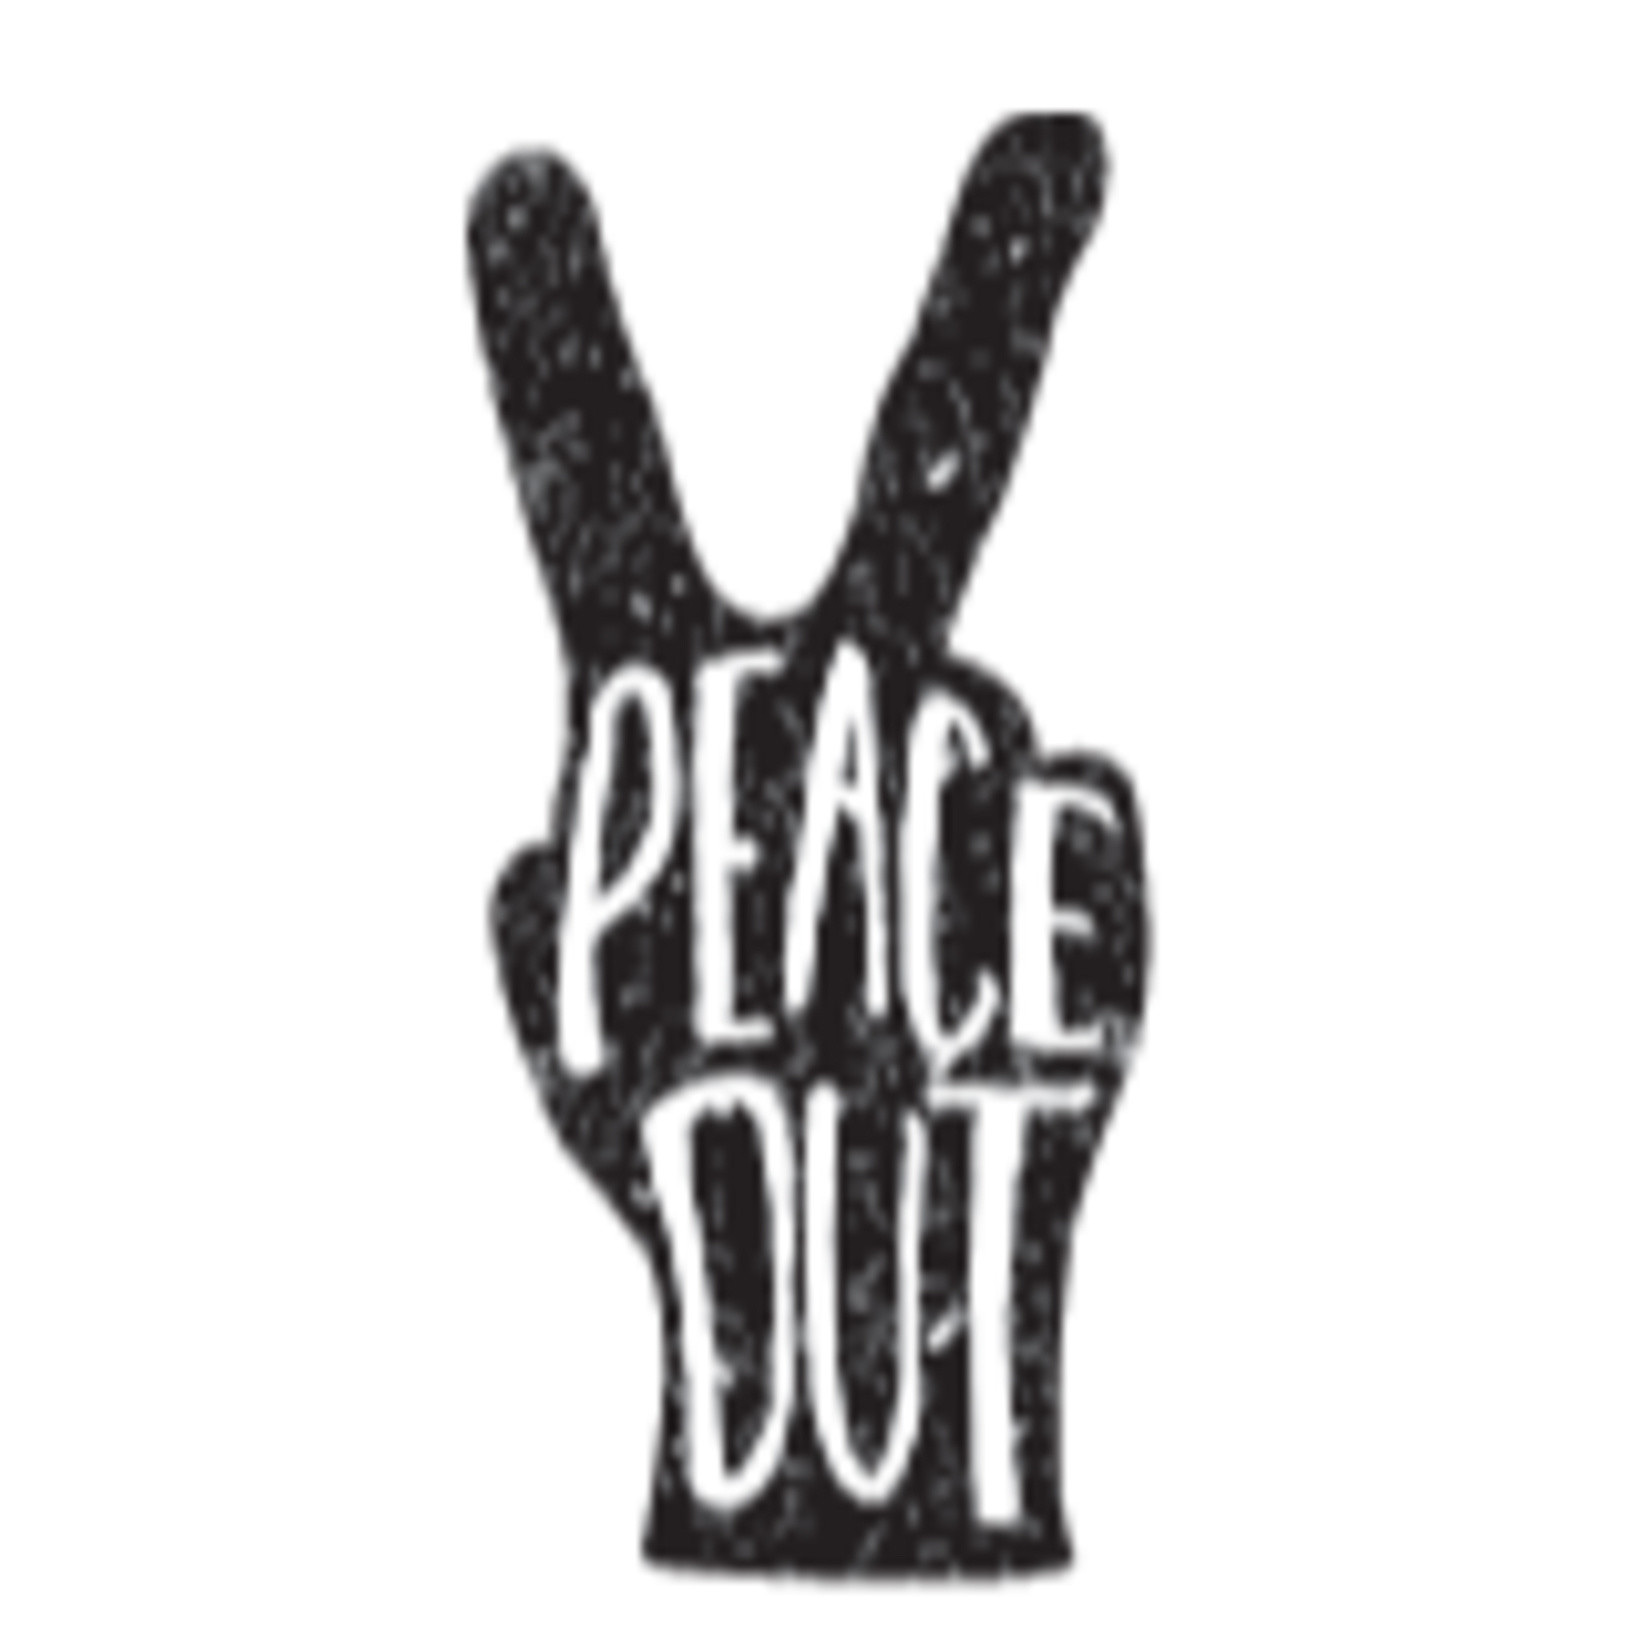 Sticker - Peace Out